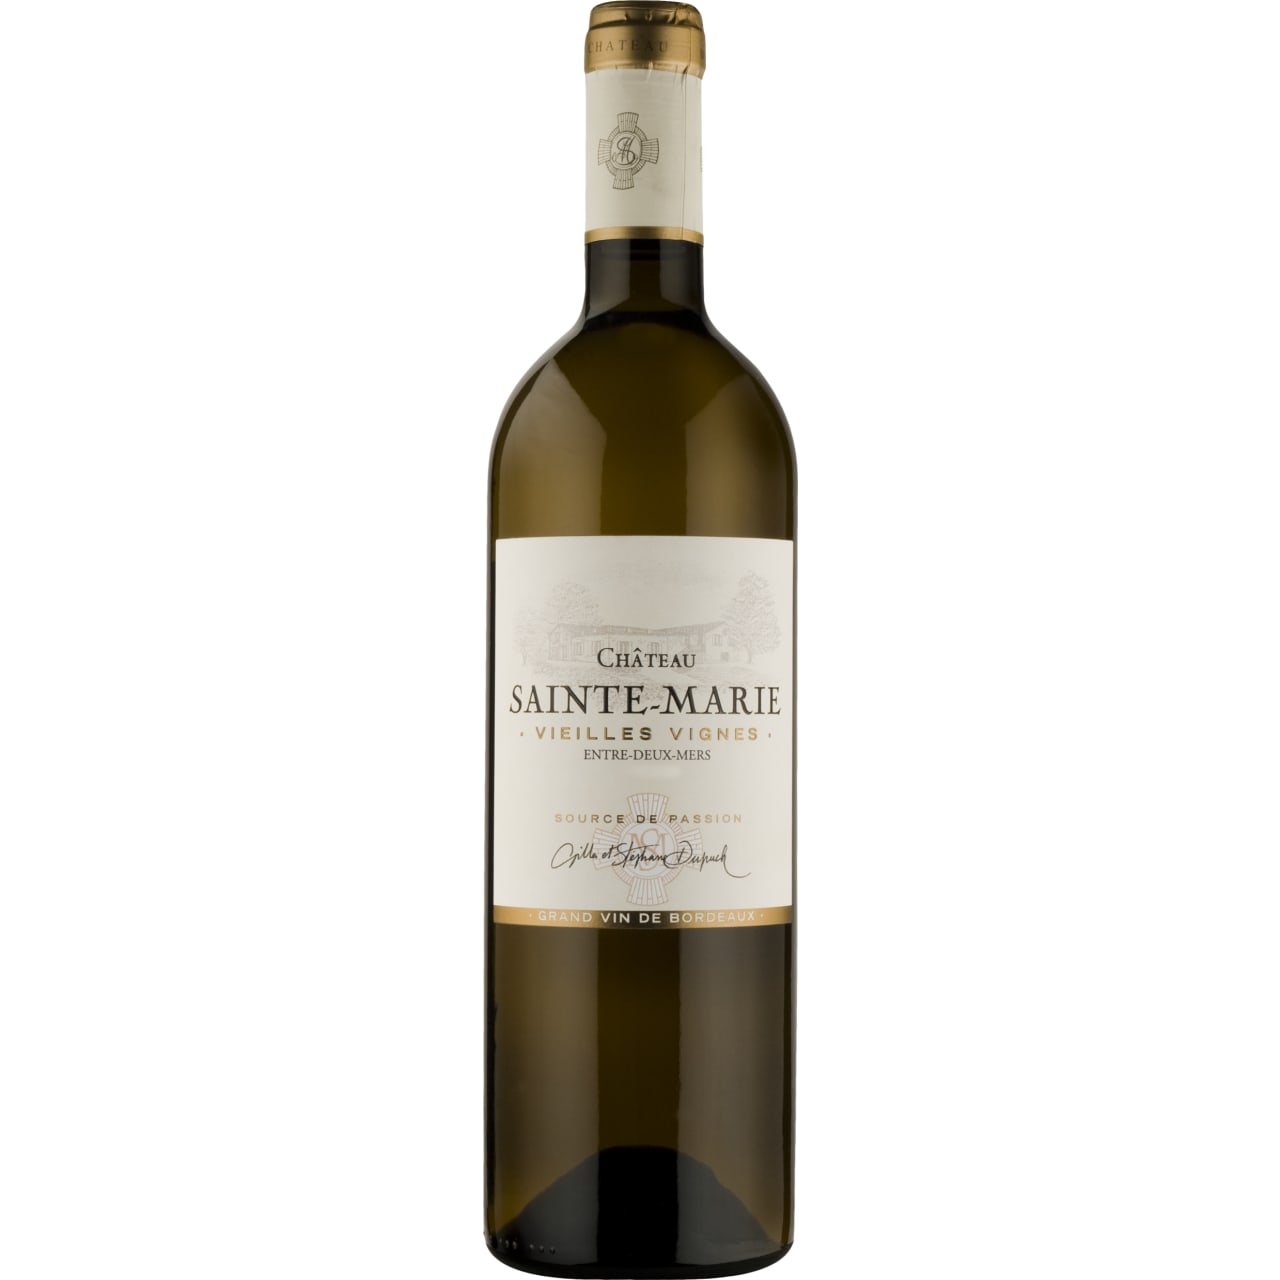 Bright, pale yellow robe. This wine is packed with fruit and has a lot of attitude!